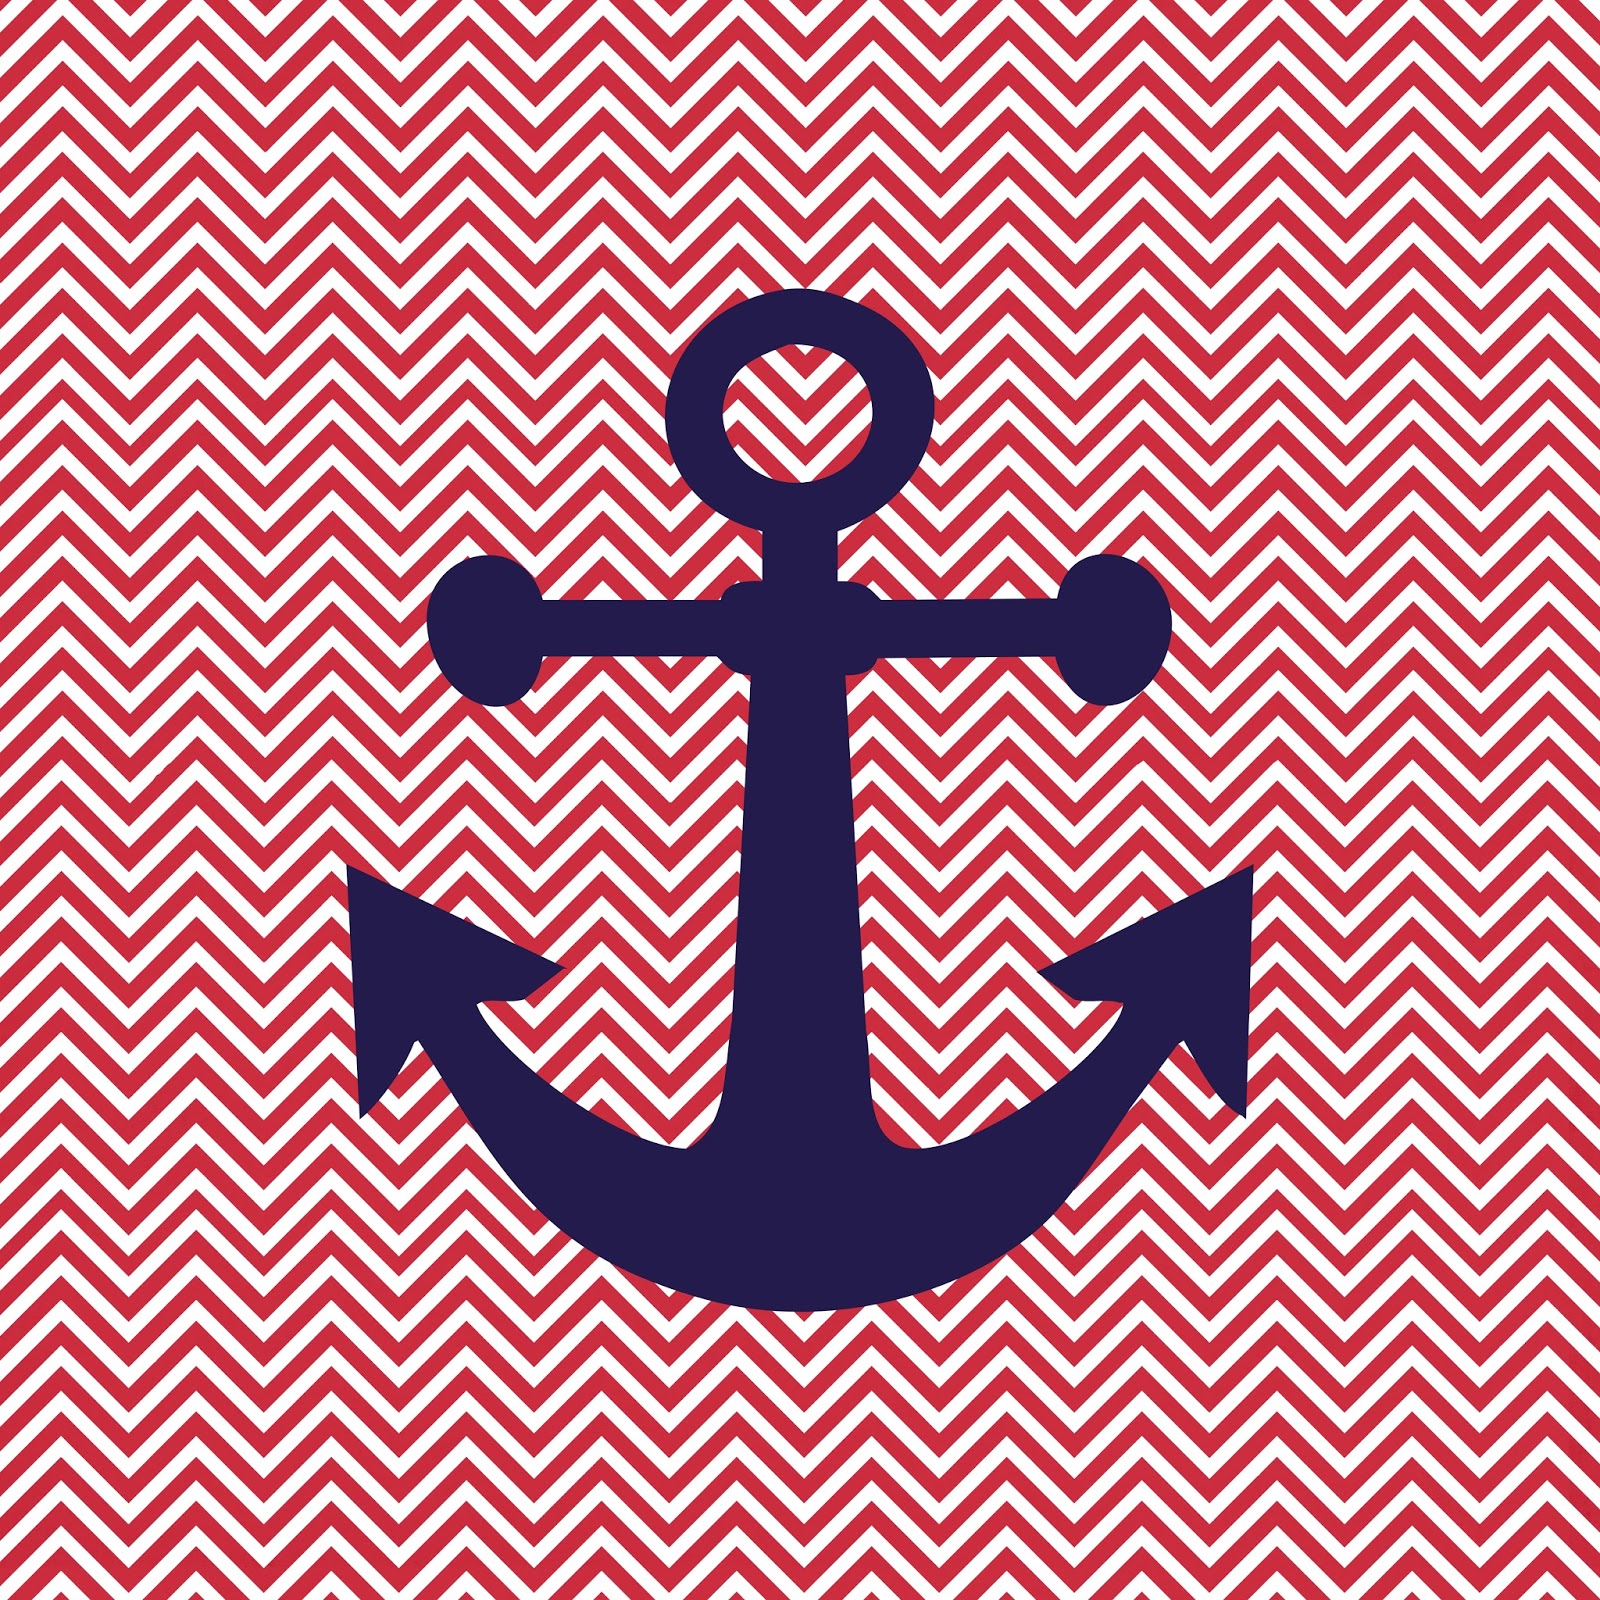 Chevron Anchor Background The Red